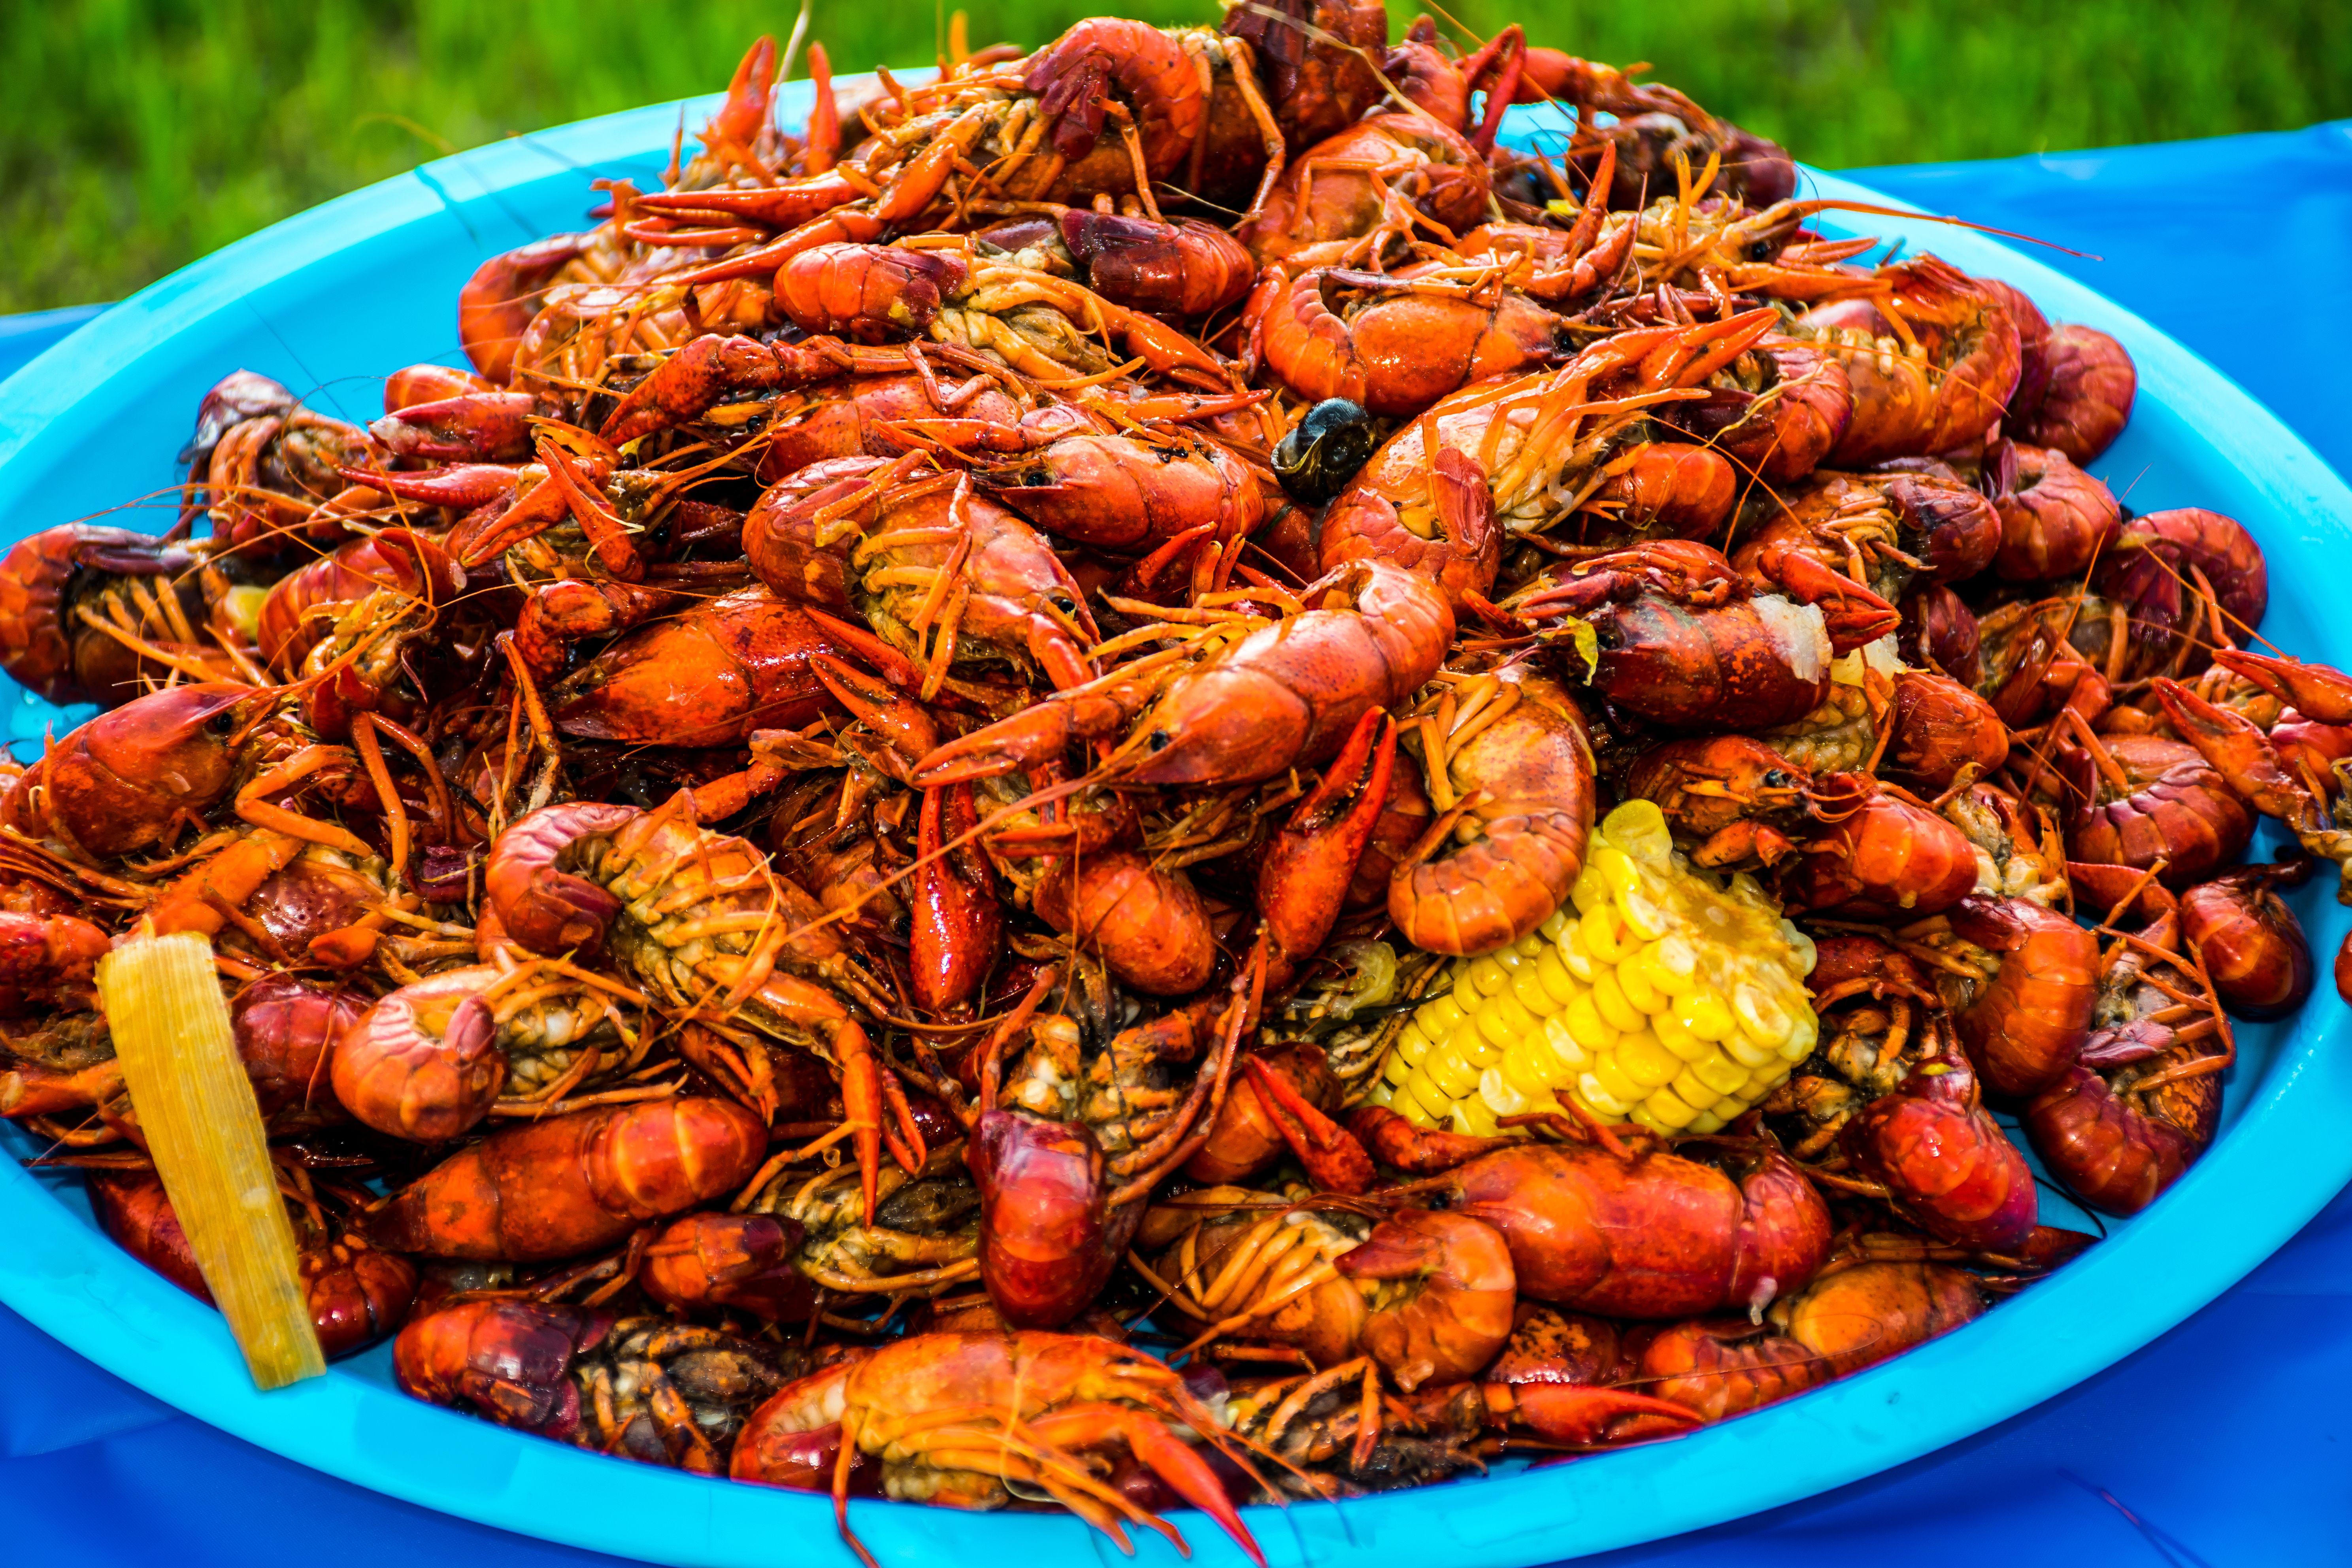 A plate of crawfish served with corn